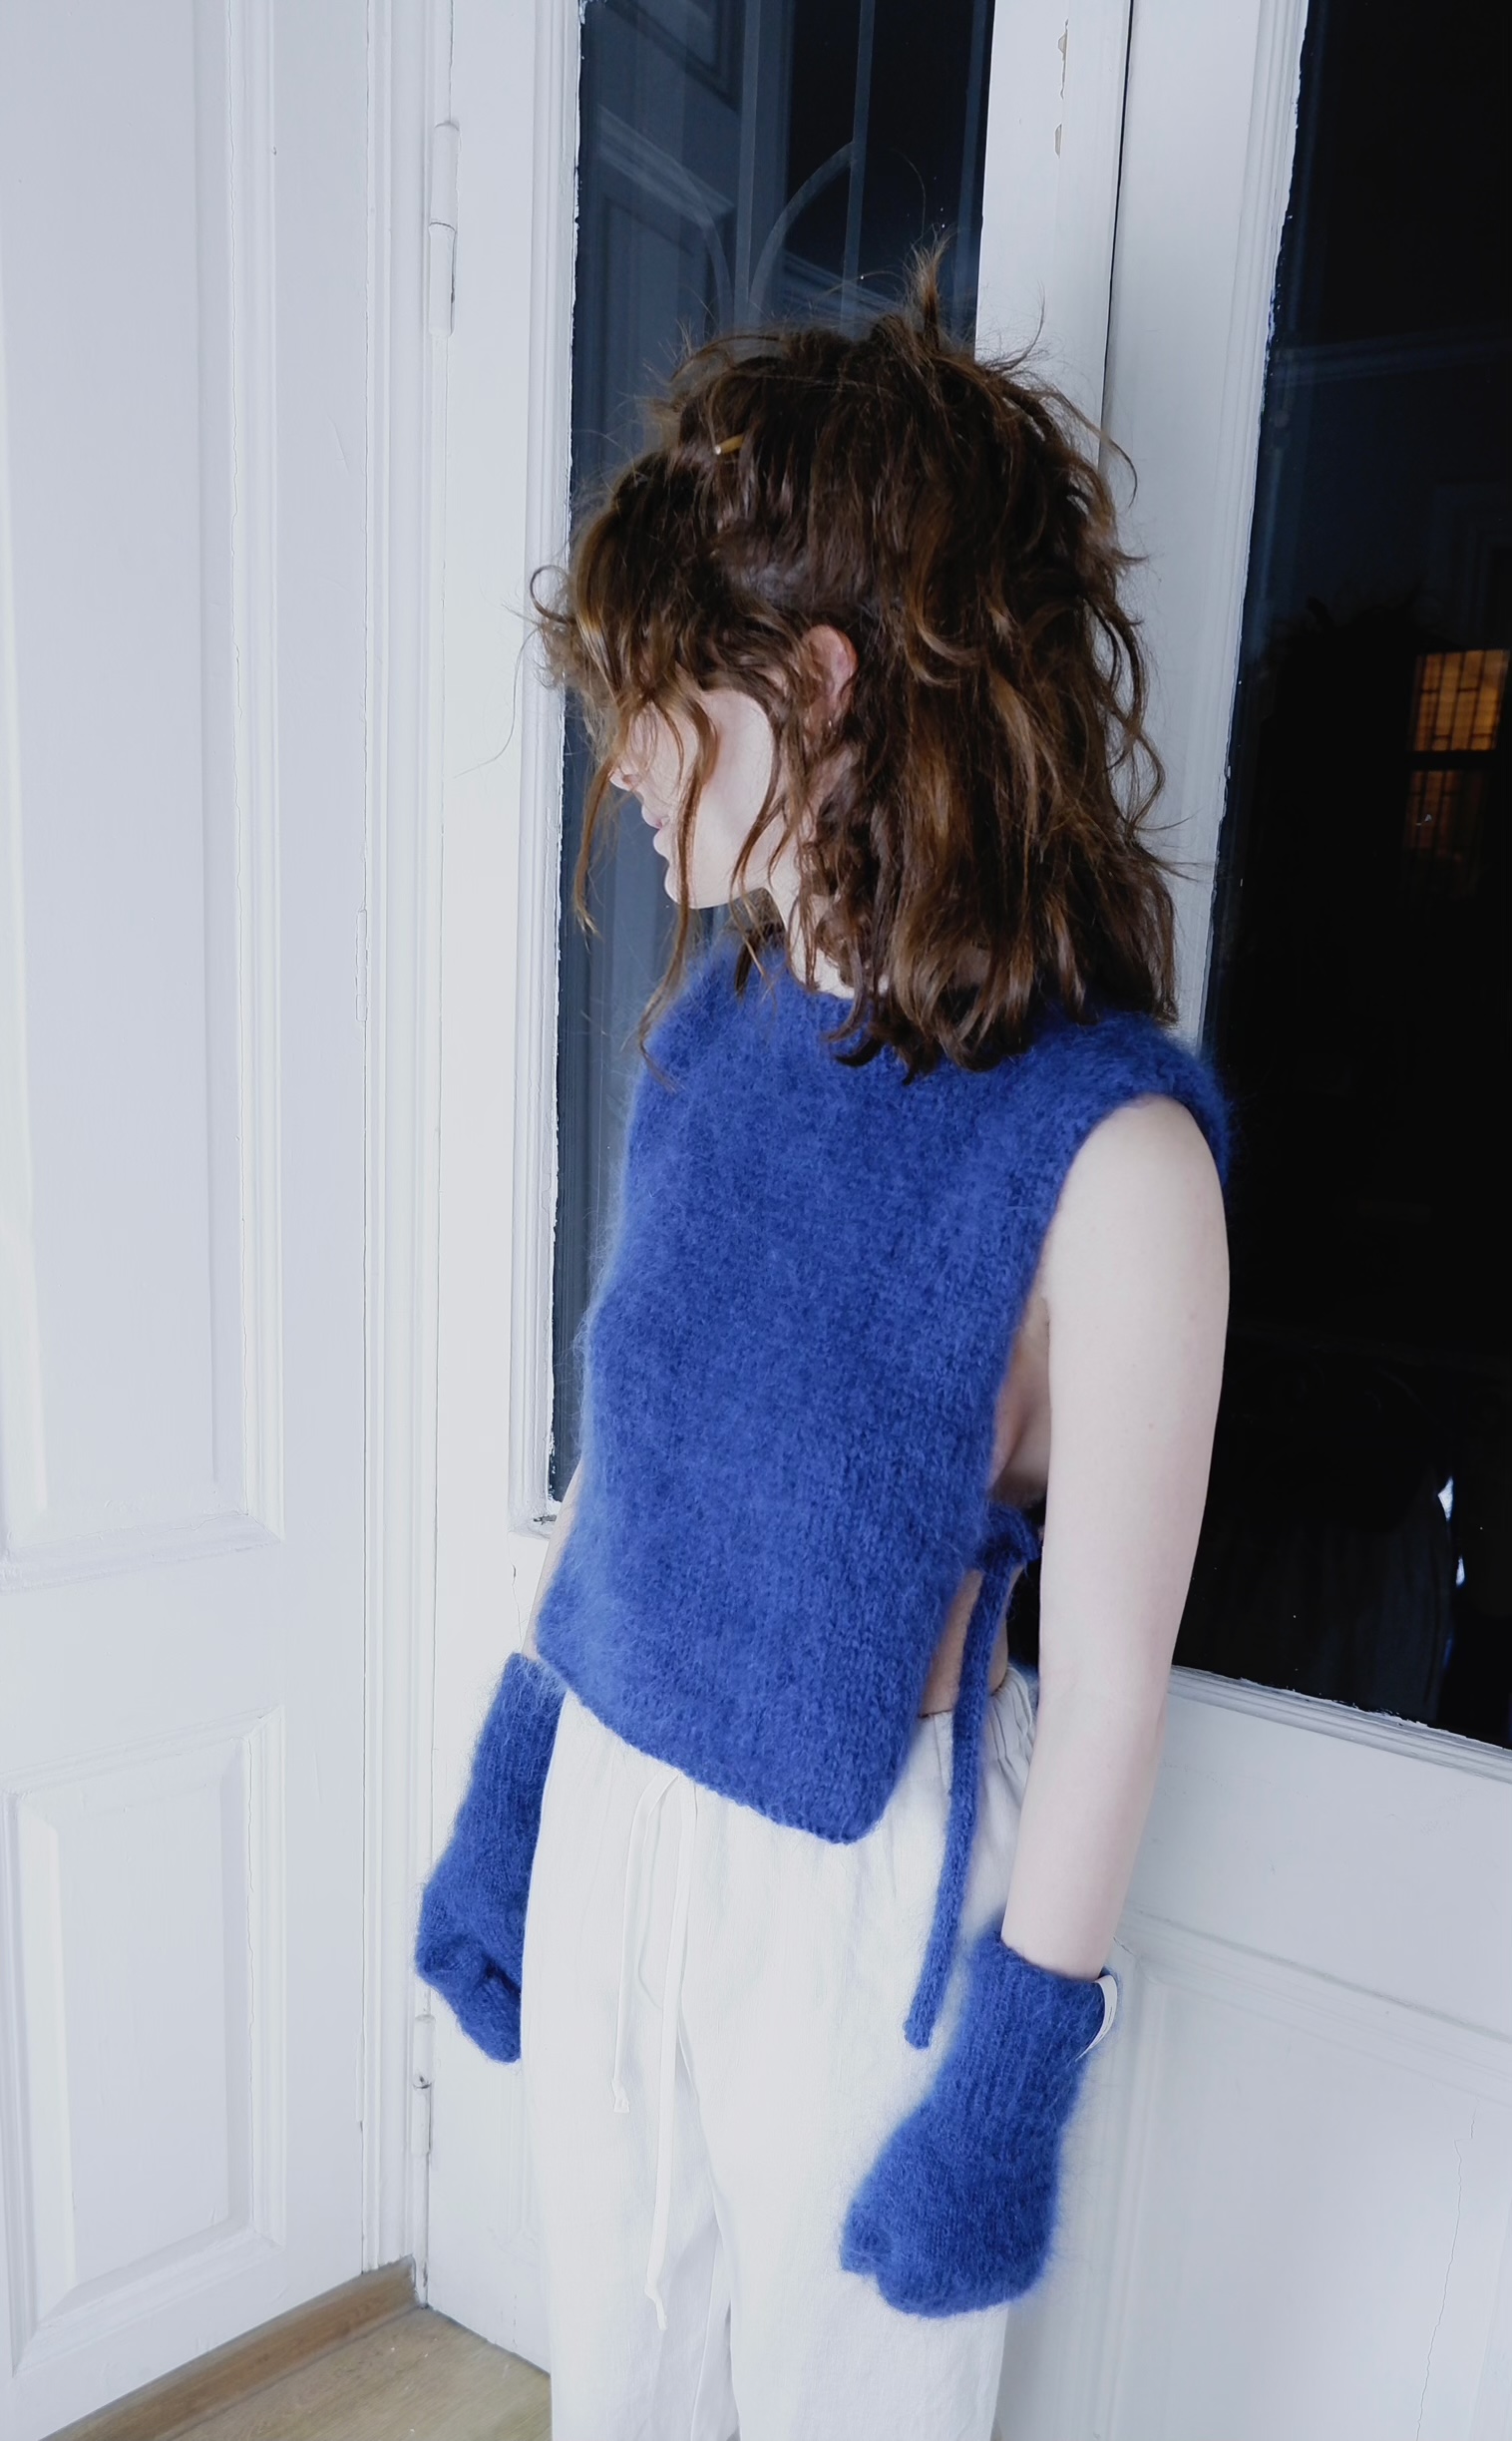 HANDMADE BLUE KNITTED LACE TOP